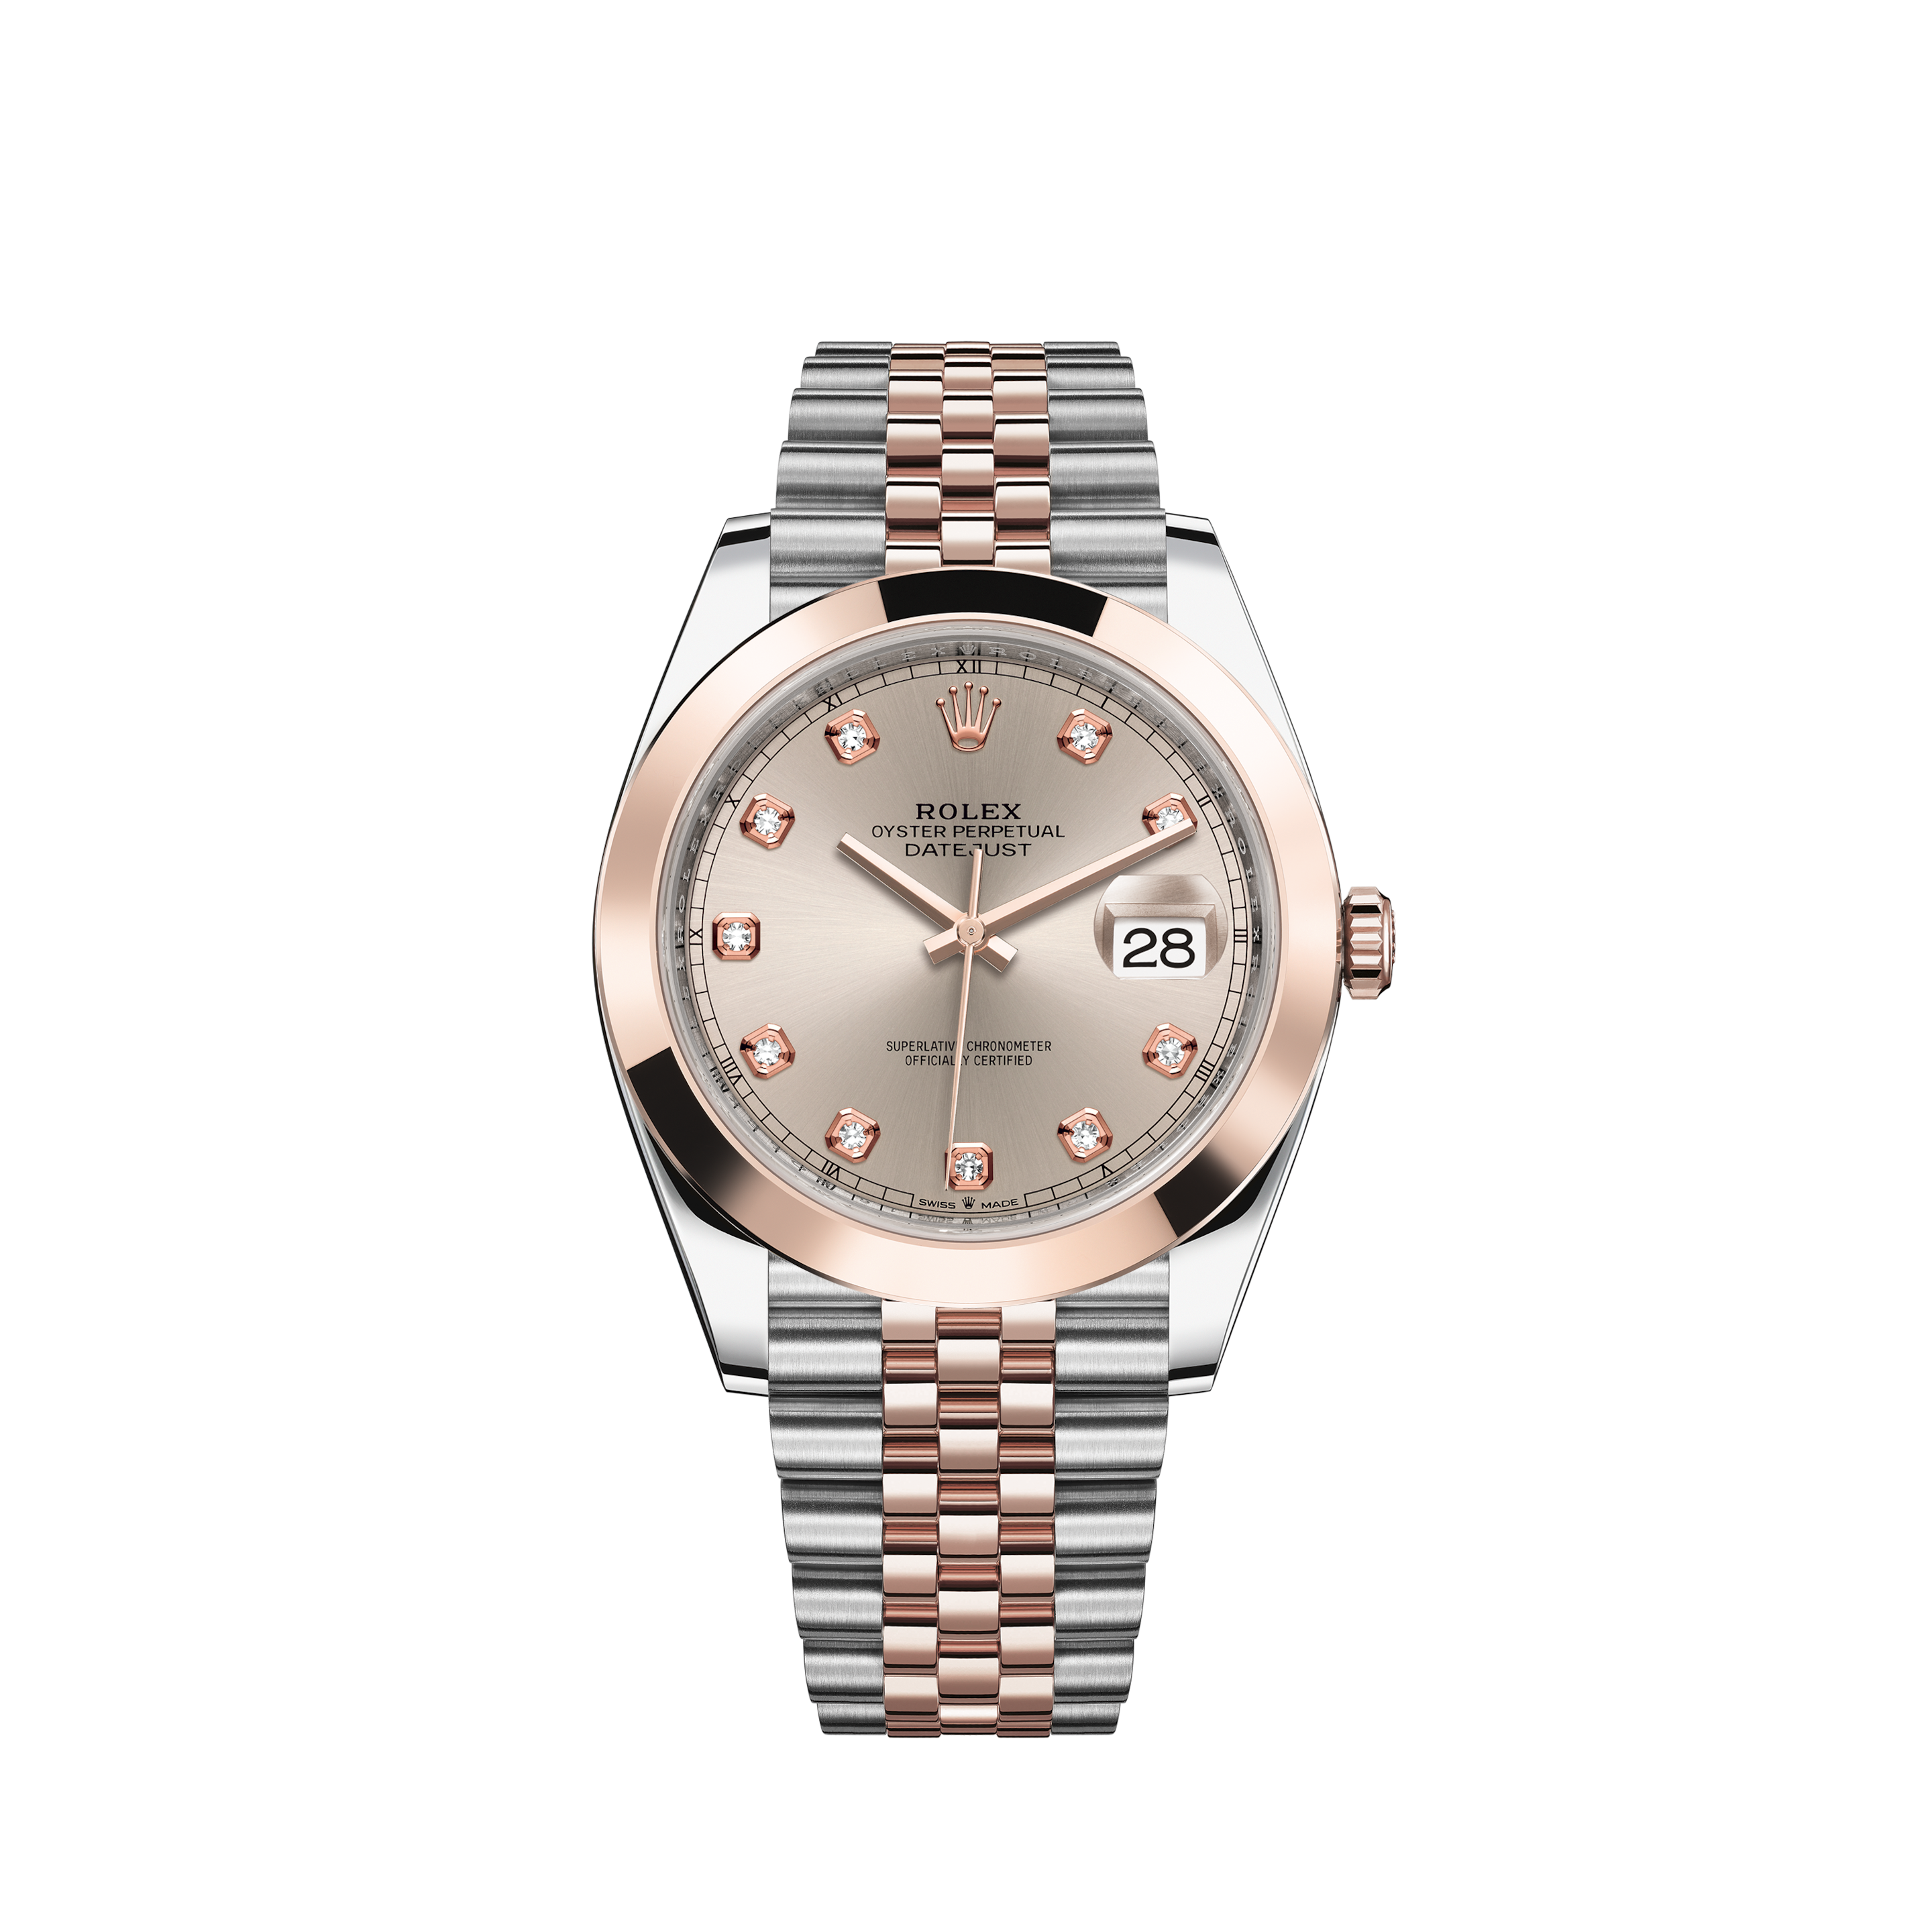 Rolex Oyster Perpetual 34 Hard Rock Cafe 10th Automatik Herrenuhr 114200 B&PRolex Oyster Perpetual 34 LC 100 - 06/2021